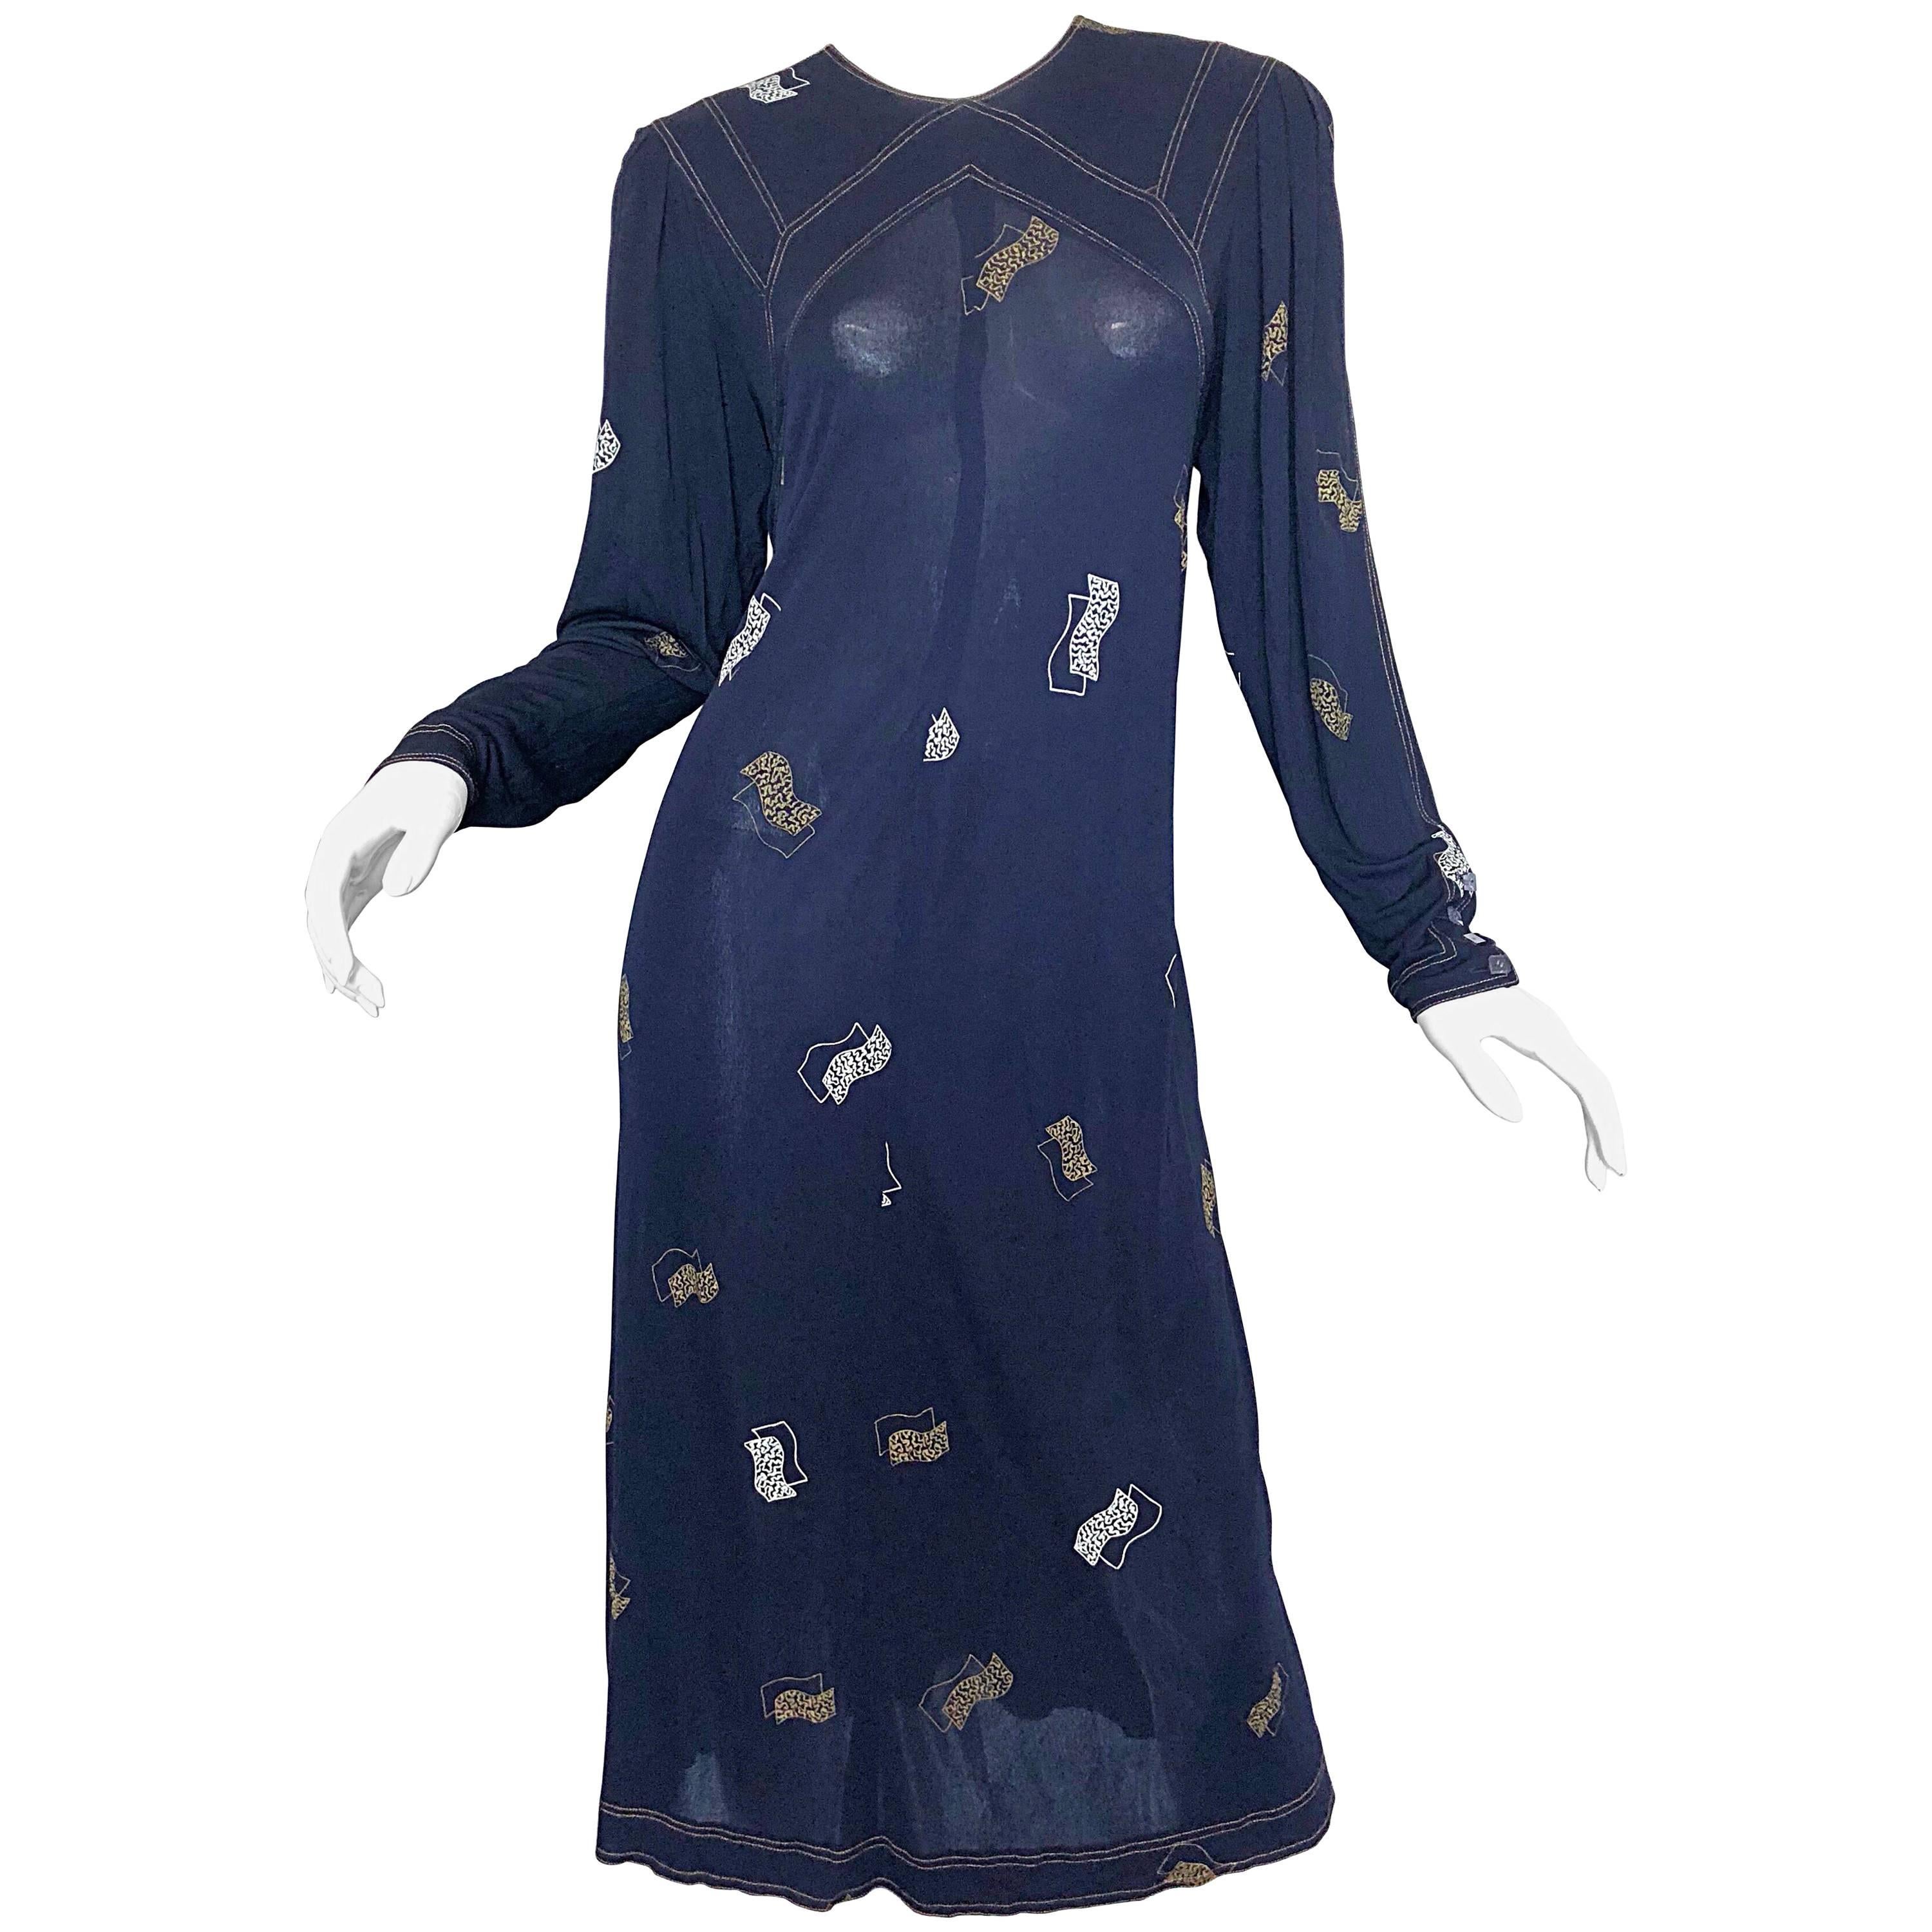 Vintage Jean Muir 1980s Does 1930s Navy Blue Hand Painted Art Deco Jersey Dress